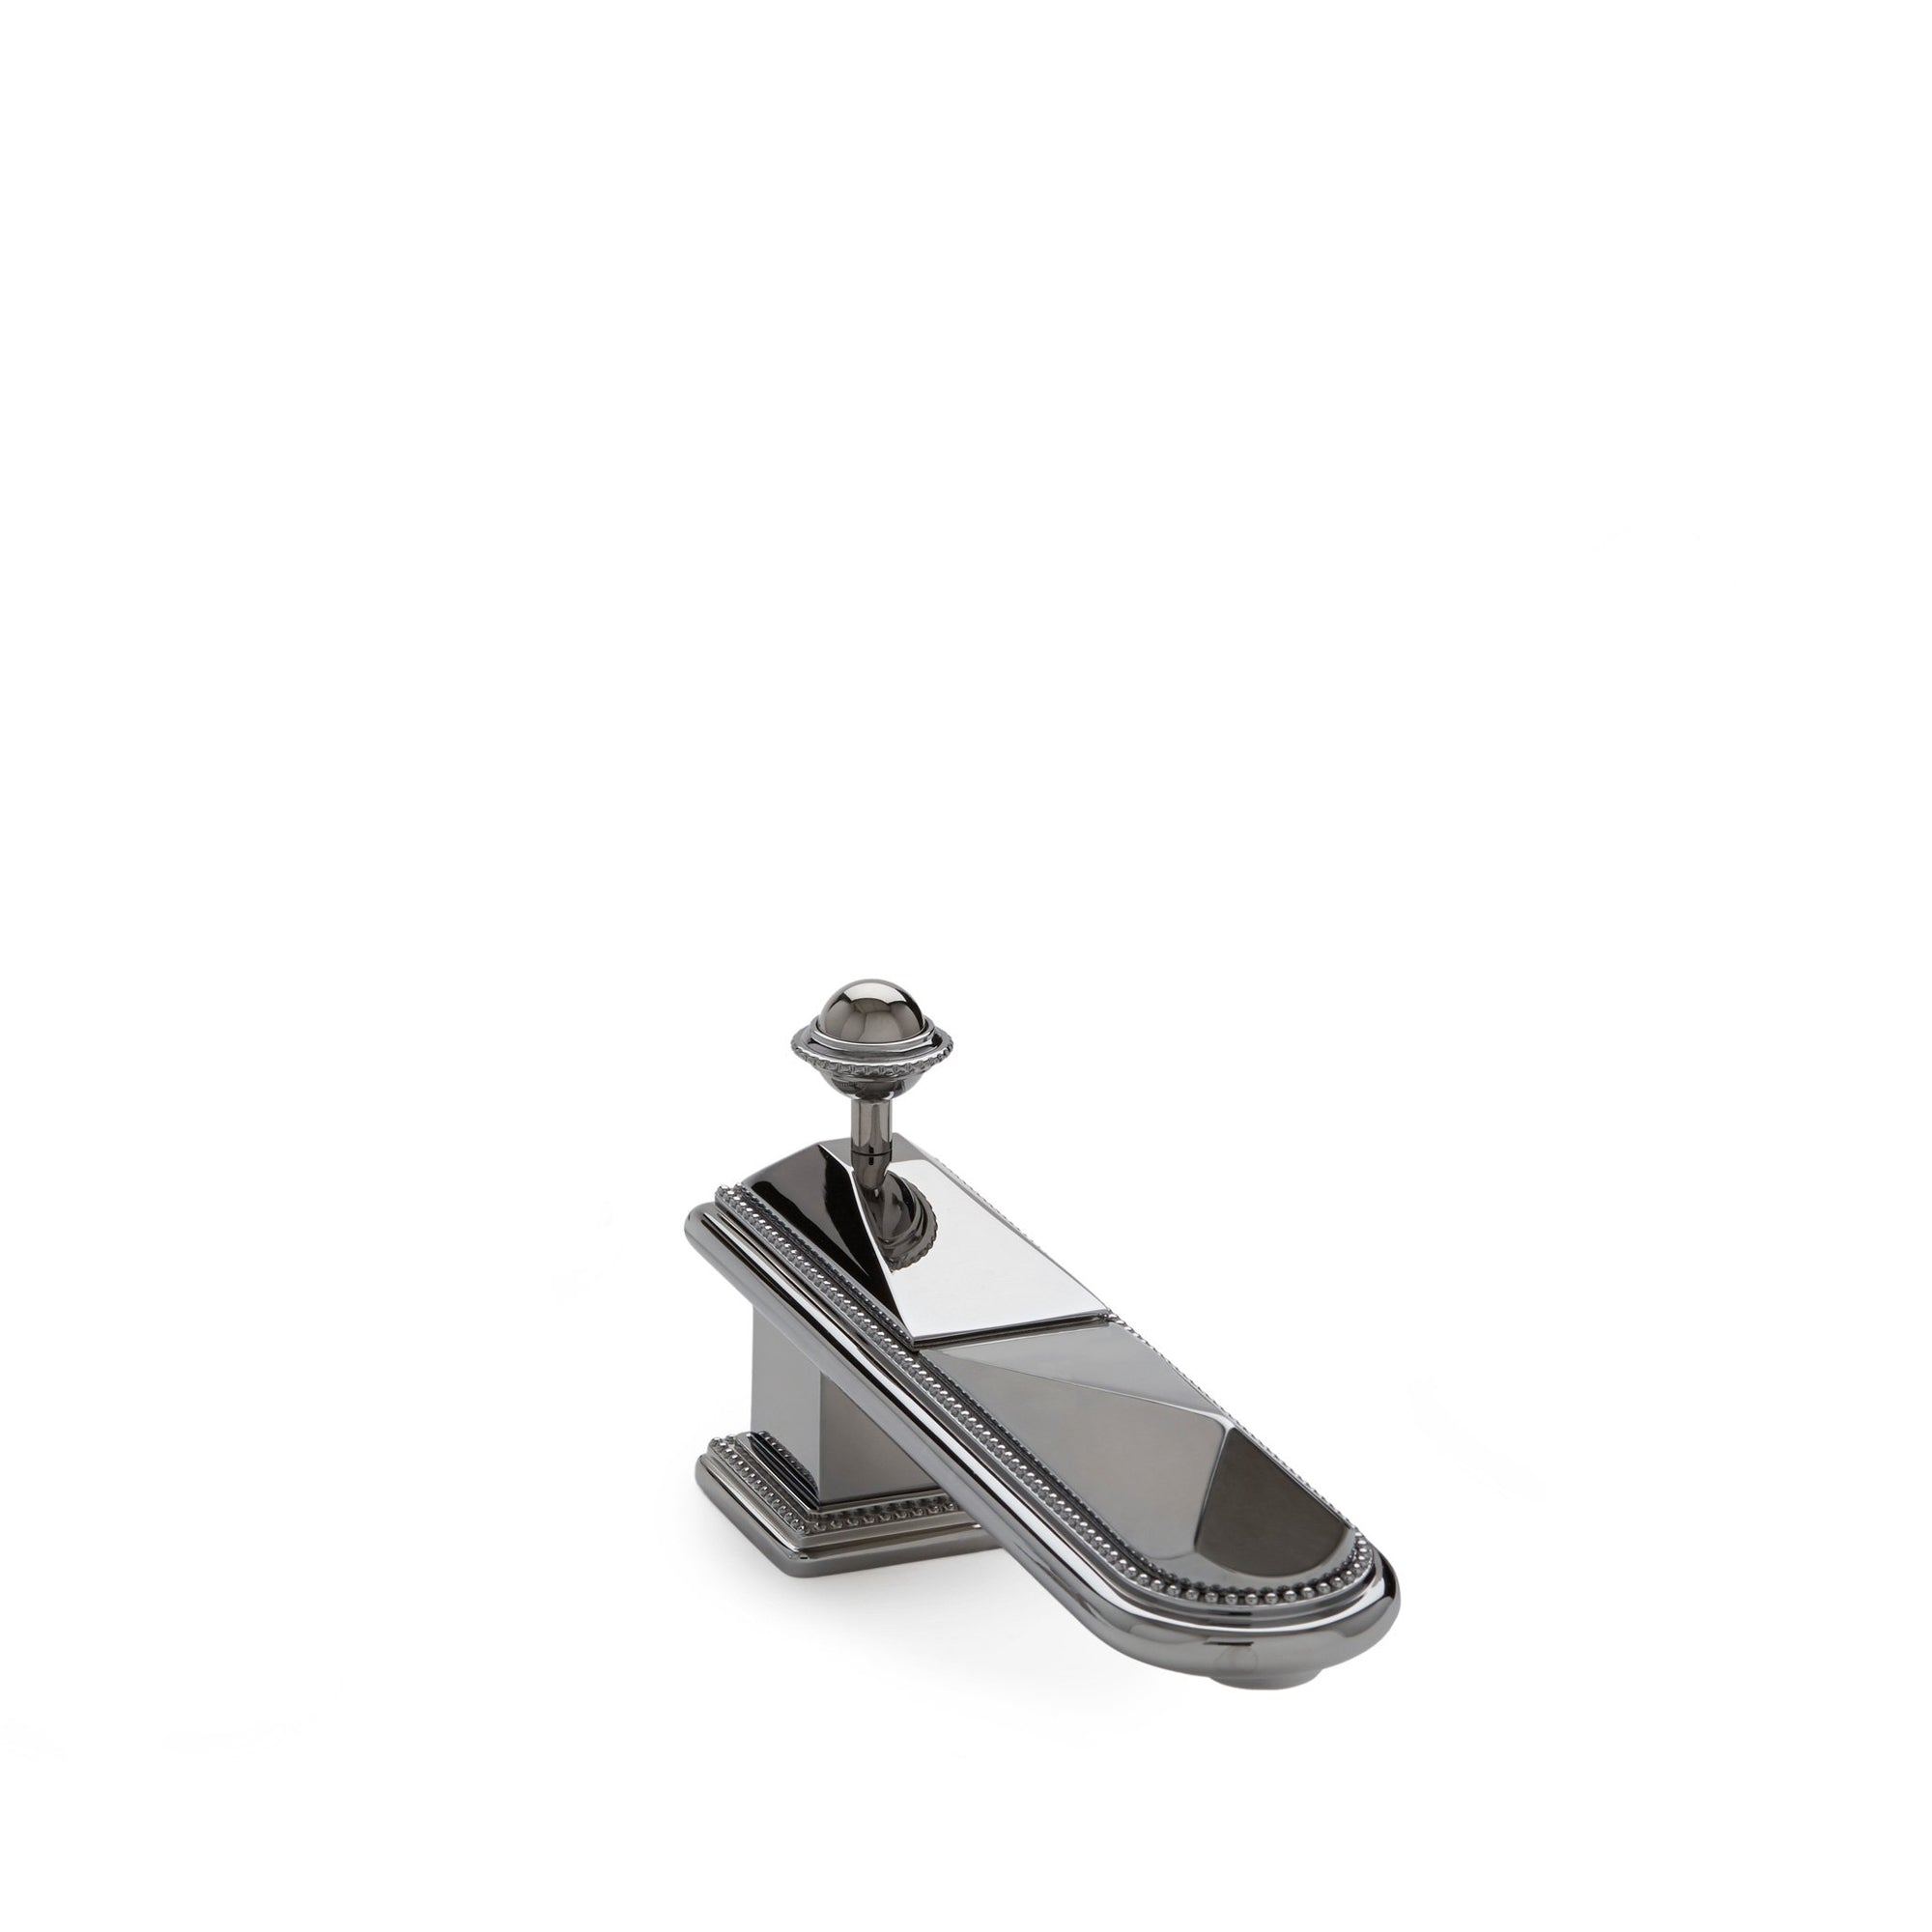 0803DKT-CP Sherle Wagner International Pyramid Deck Mount Tub Spout in Polished Chrome metal finish